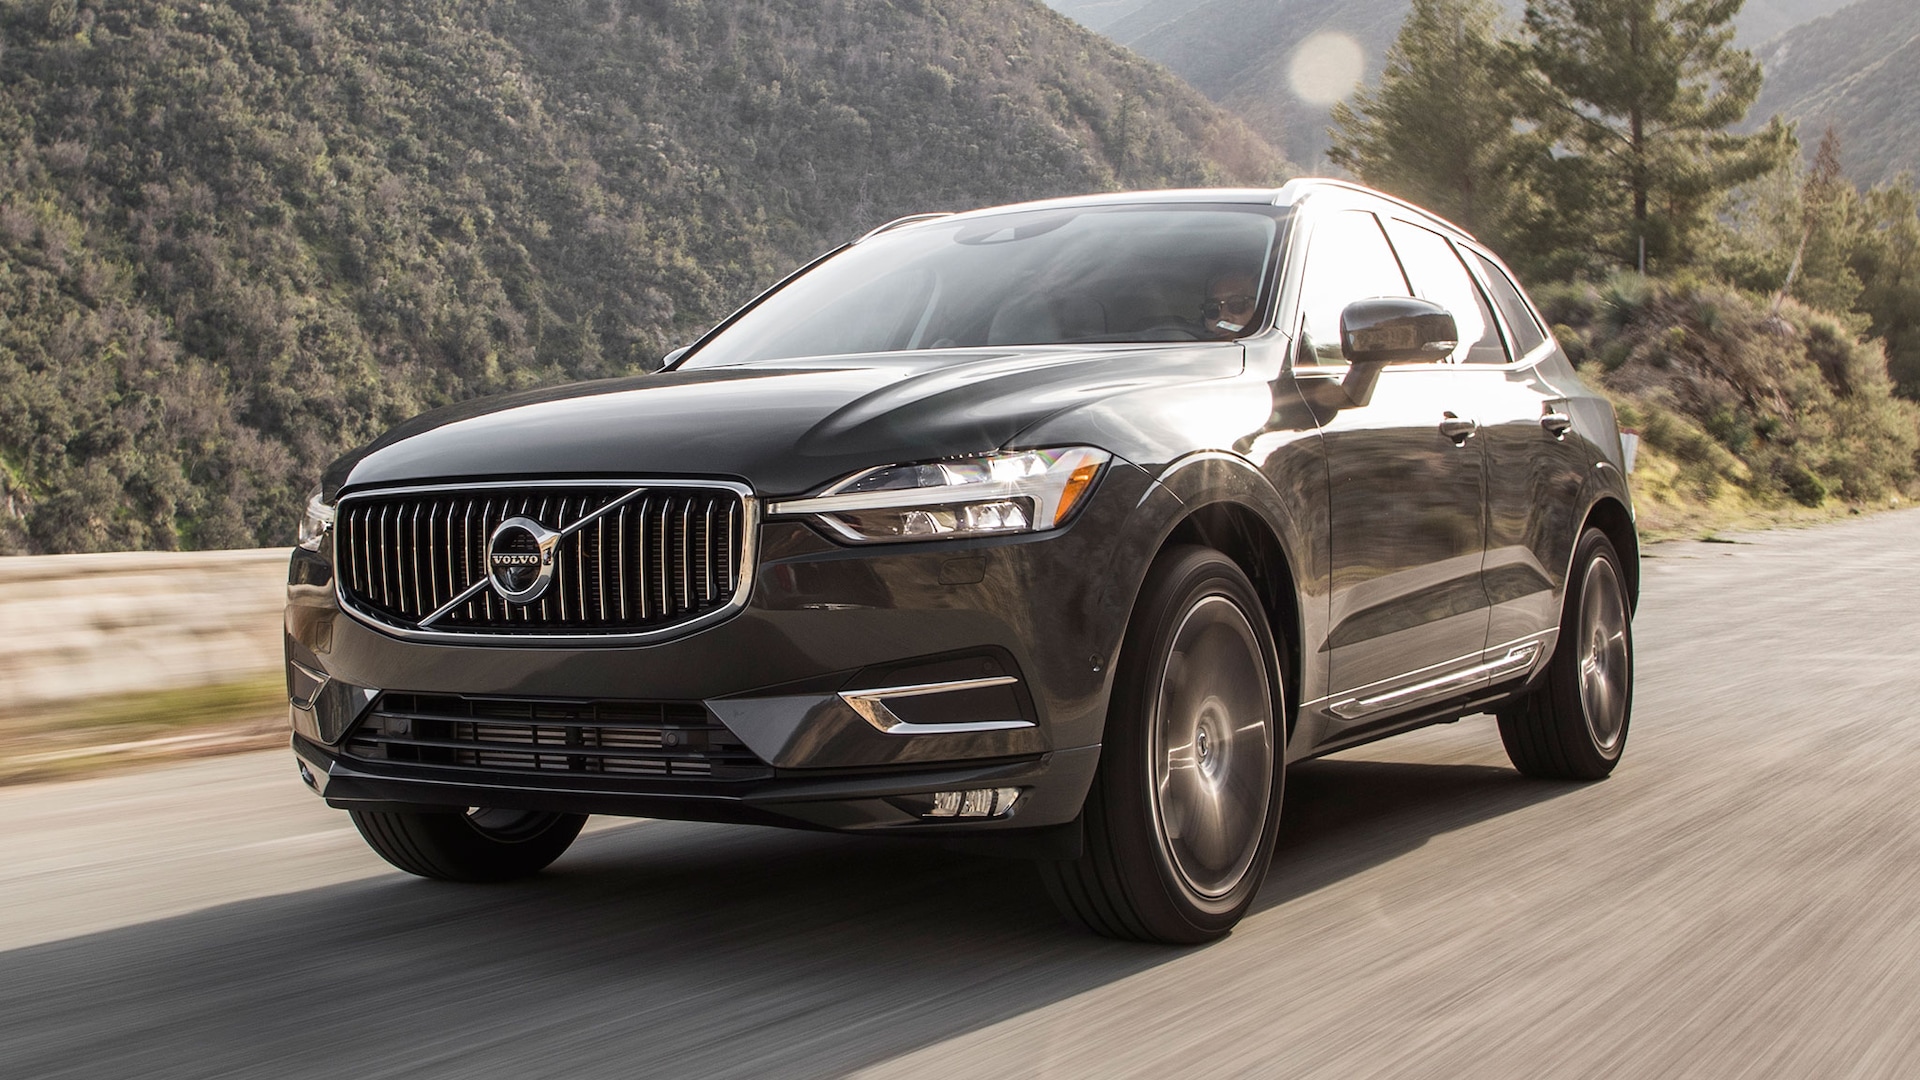 2020 Volvo XC60 T6 Inscription: 6 Features We Like, and 3 We Don't